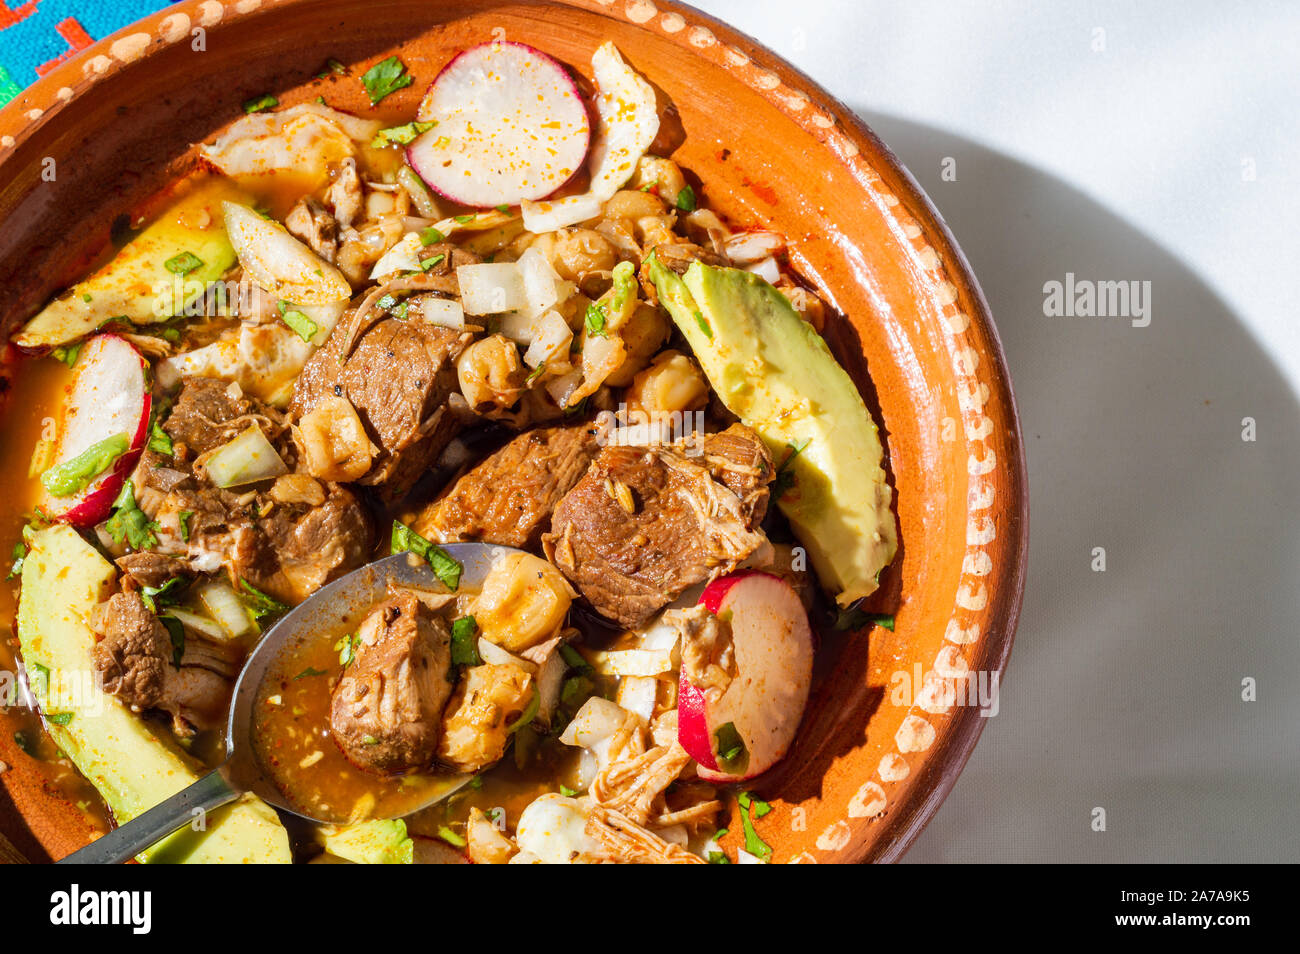 Red pozole, a traditional Mexican stew made with pork and hominy corn. In the Aztec heyday, this dish was made with human meat but the Spaniards ended Stock Photo